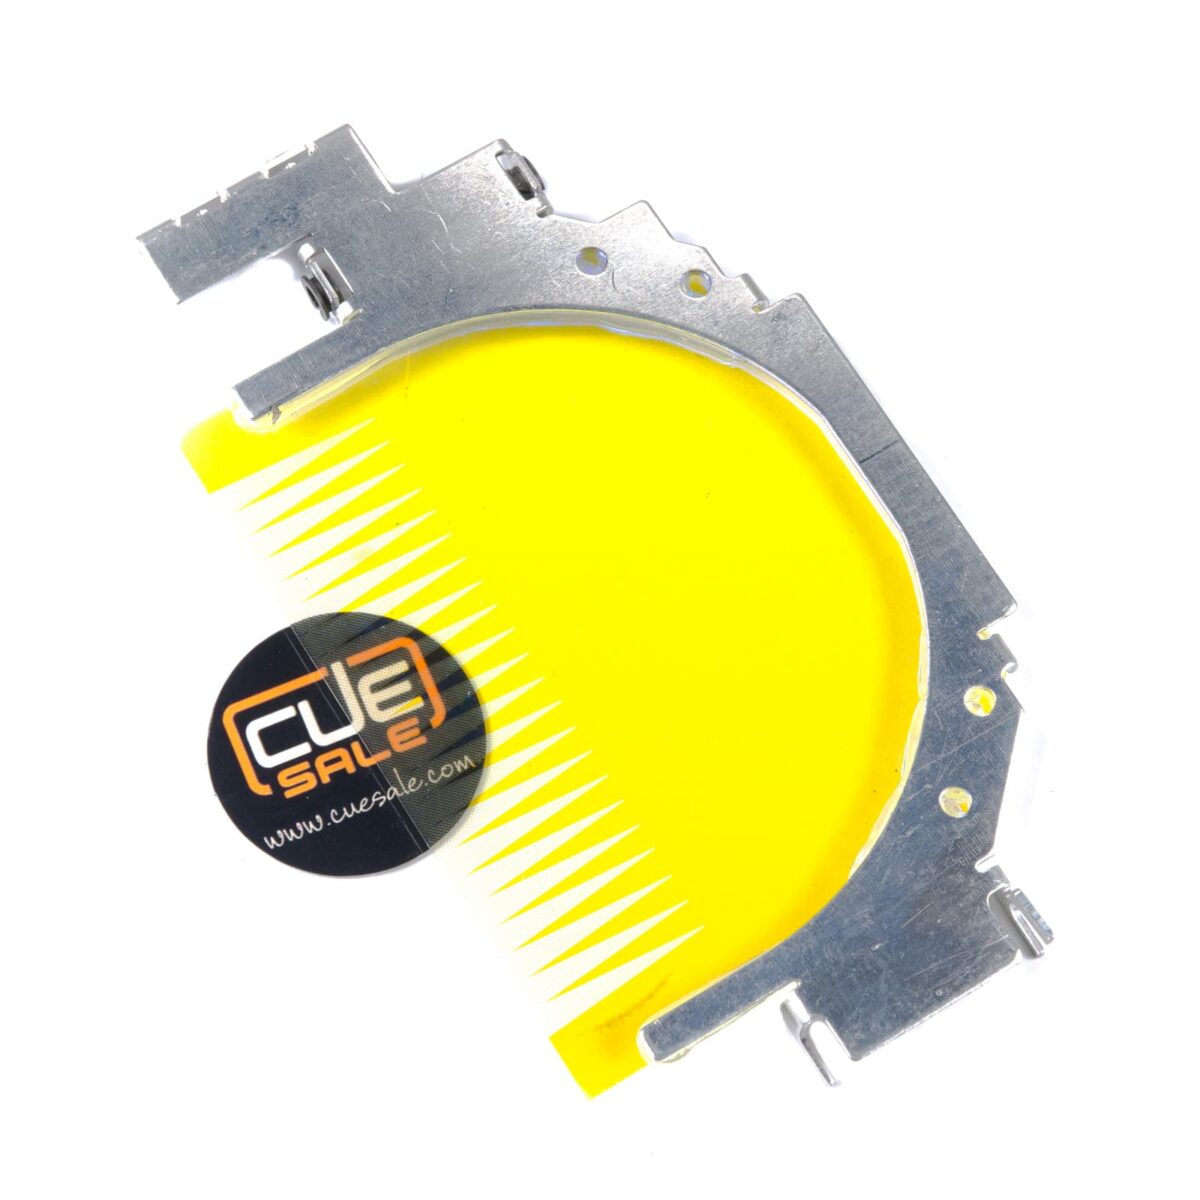 Clay Paky - Blade assembly Lower Yellow CP1200 spot profile